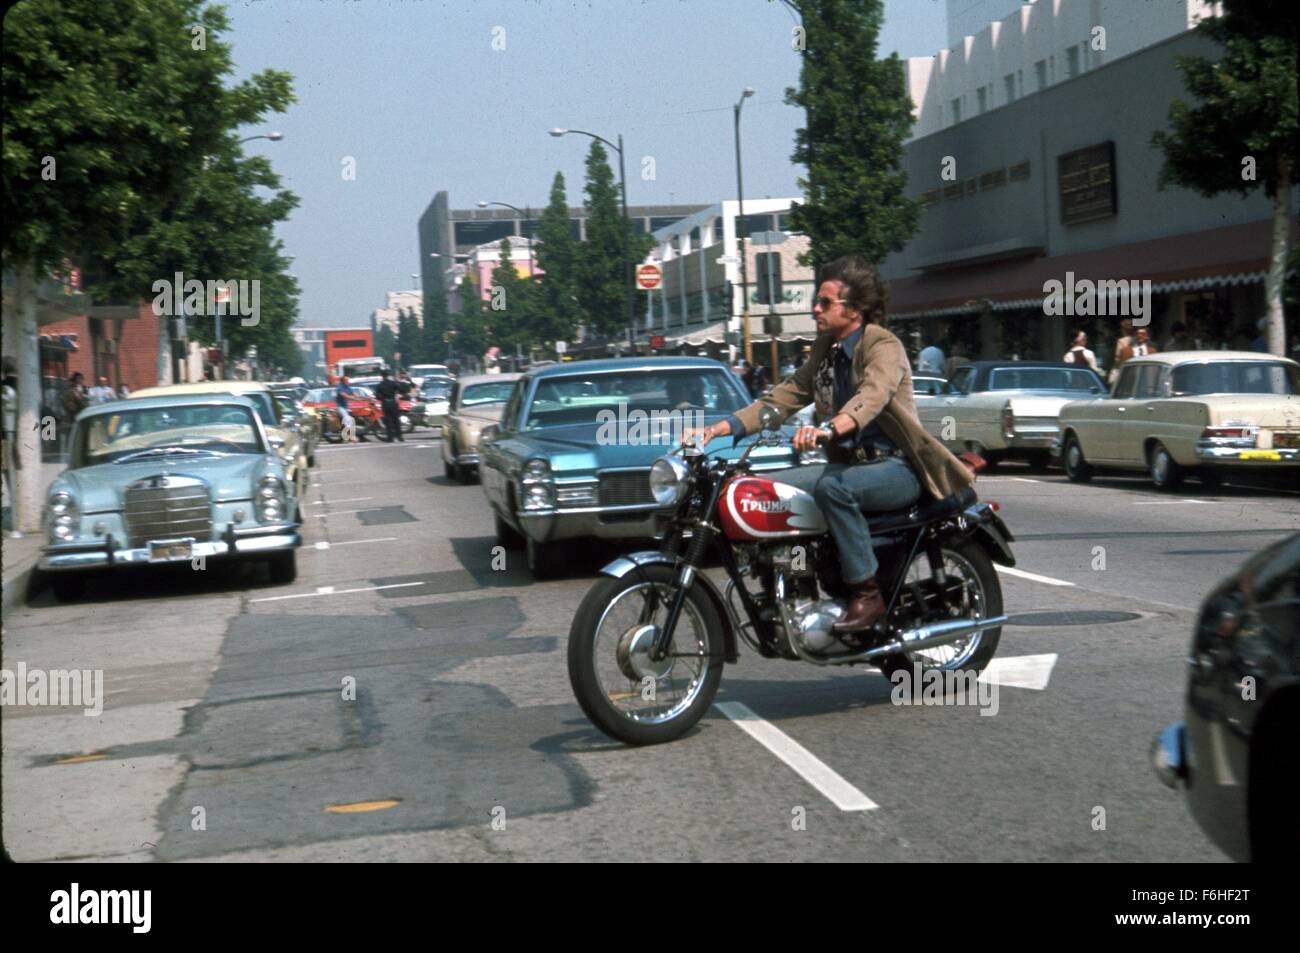 1975, Film Title: SHAMPOO, Director: HAL ASHBY, Pictured: ACCESSORIES, WARREN BEATTY, BEVERLY HILLS, MOTORCYCLE, SUNGLASSES, VEHICLE, RIDING, ACTION, TOUGH, REBEL. (Credit Image: SNAP) Stock Photo